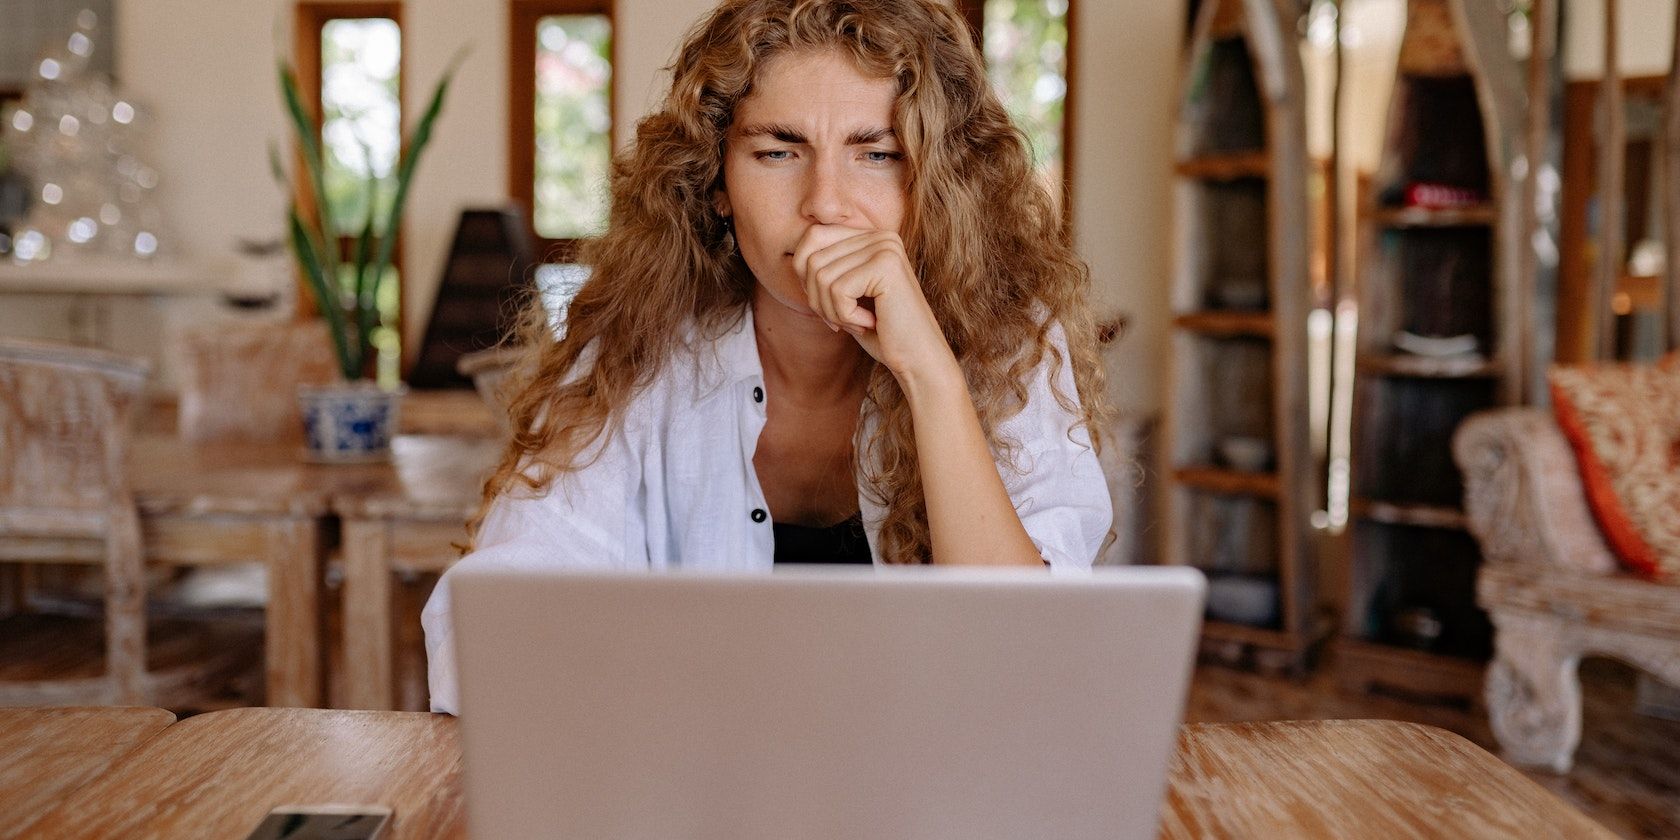 Woman staring seriously at her laptop